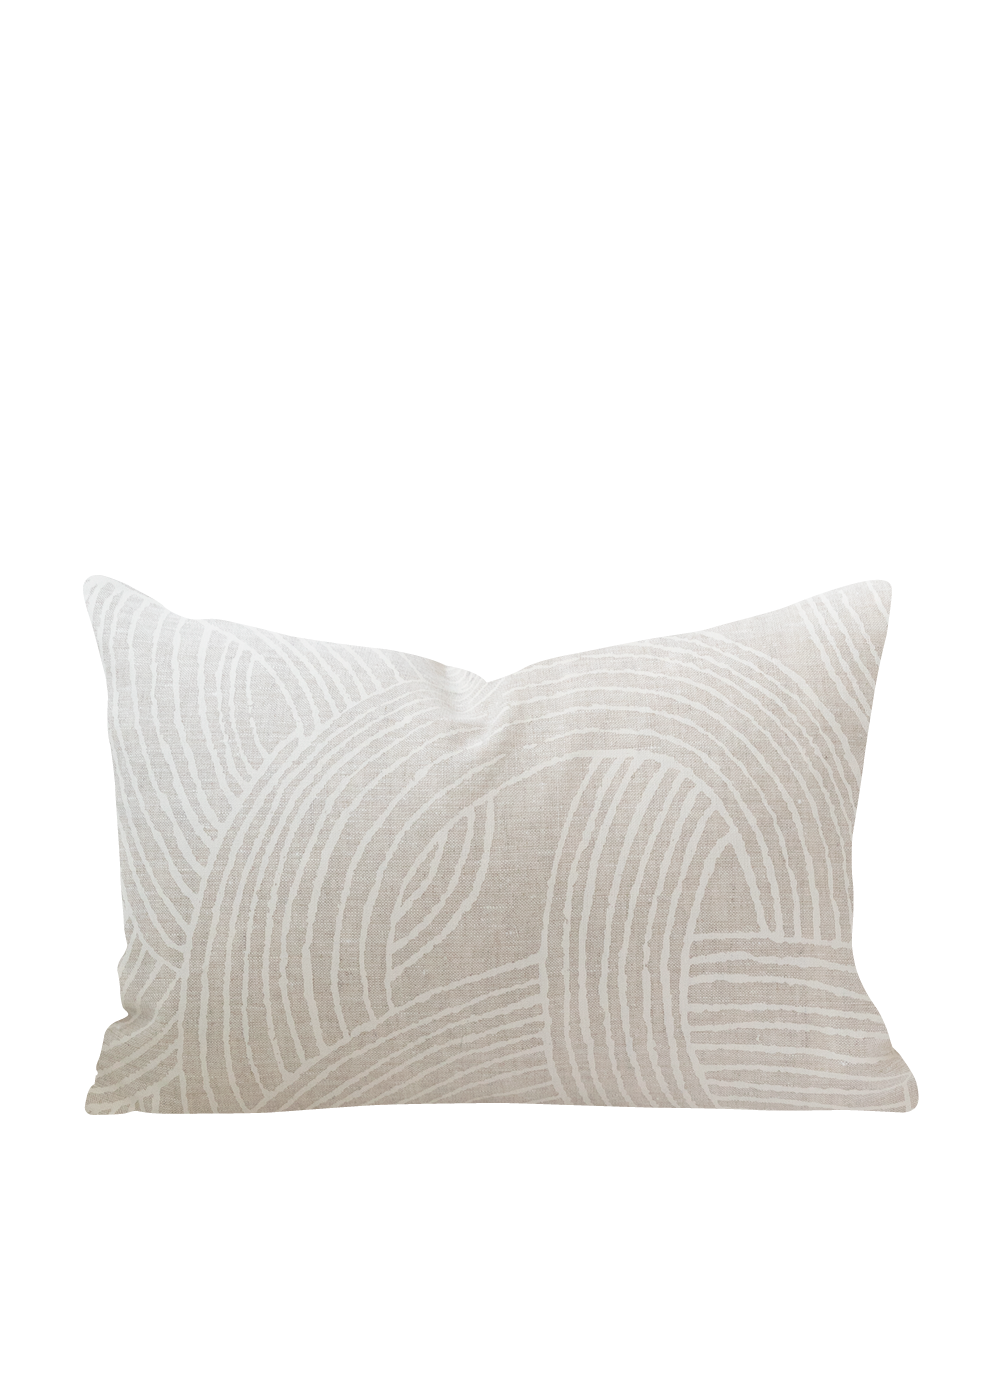 Ophelia Pillow Cover, Natural